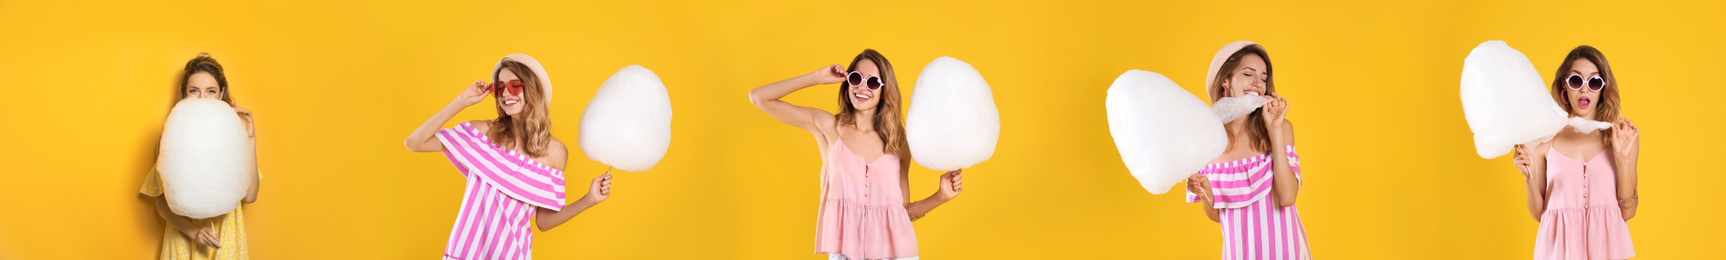 Image of Collage with photos of young woman holding cotton candy on yellow background. Banner design